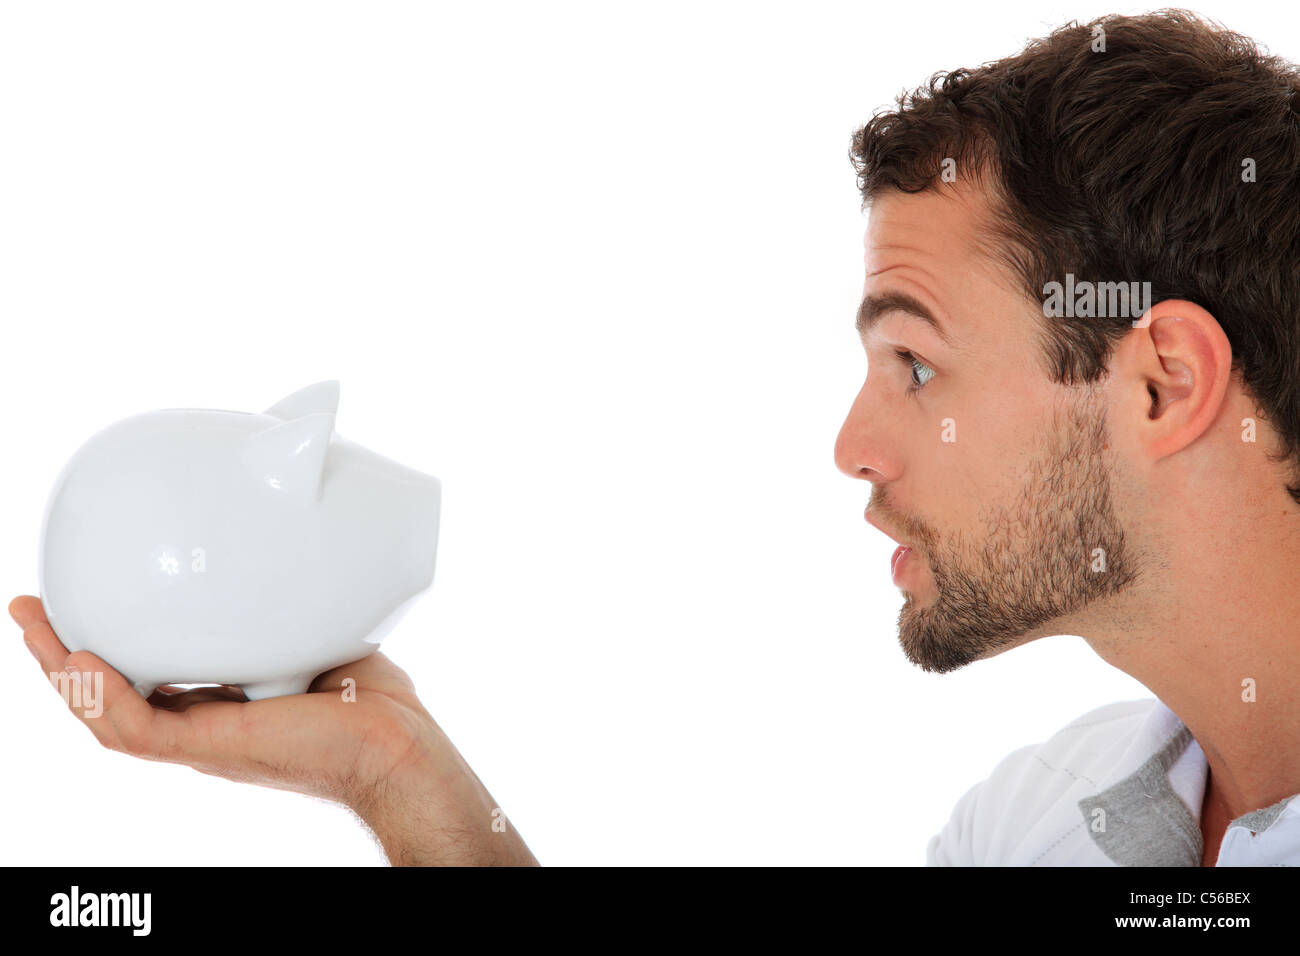 Young guy yells at his piggy bank. All on white background. Stock Photo